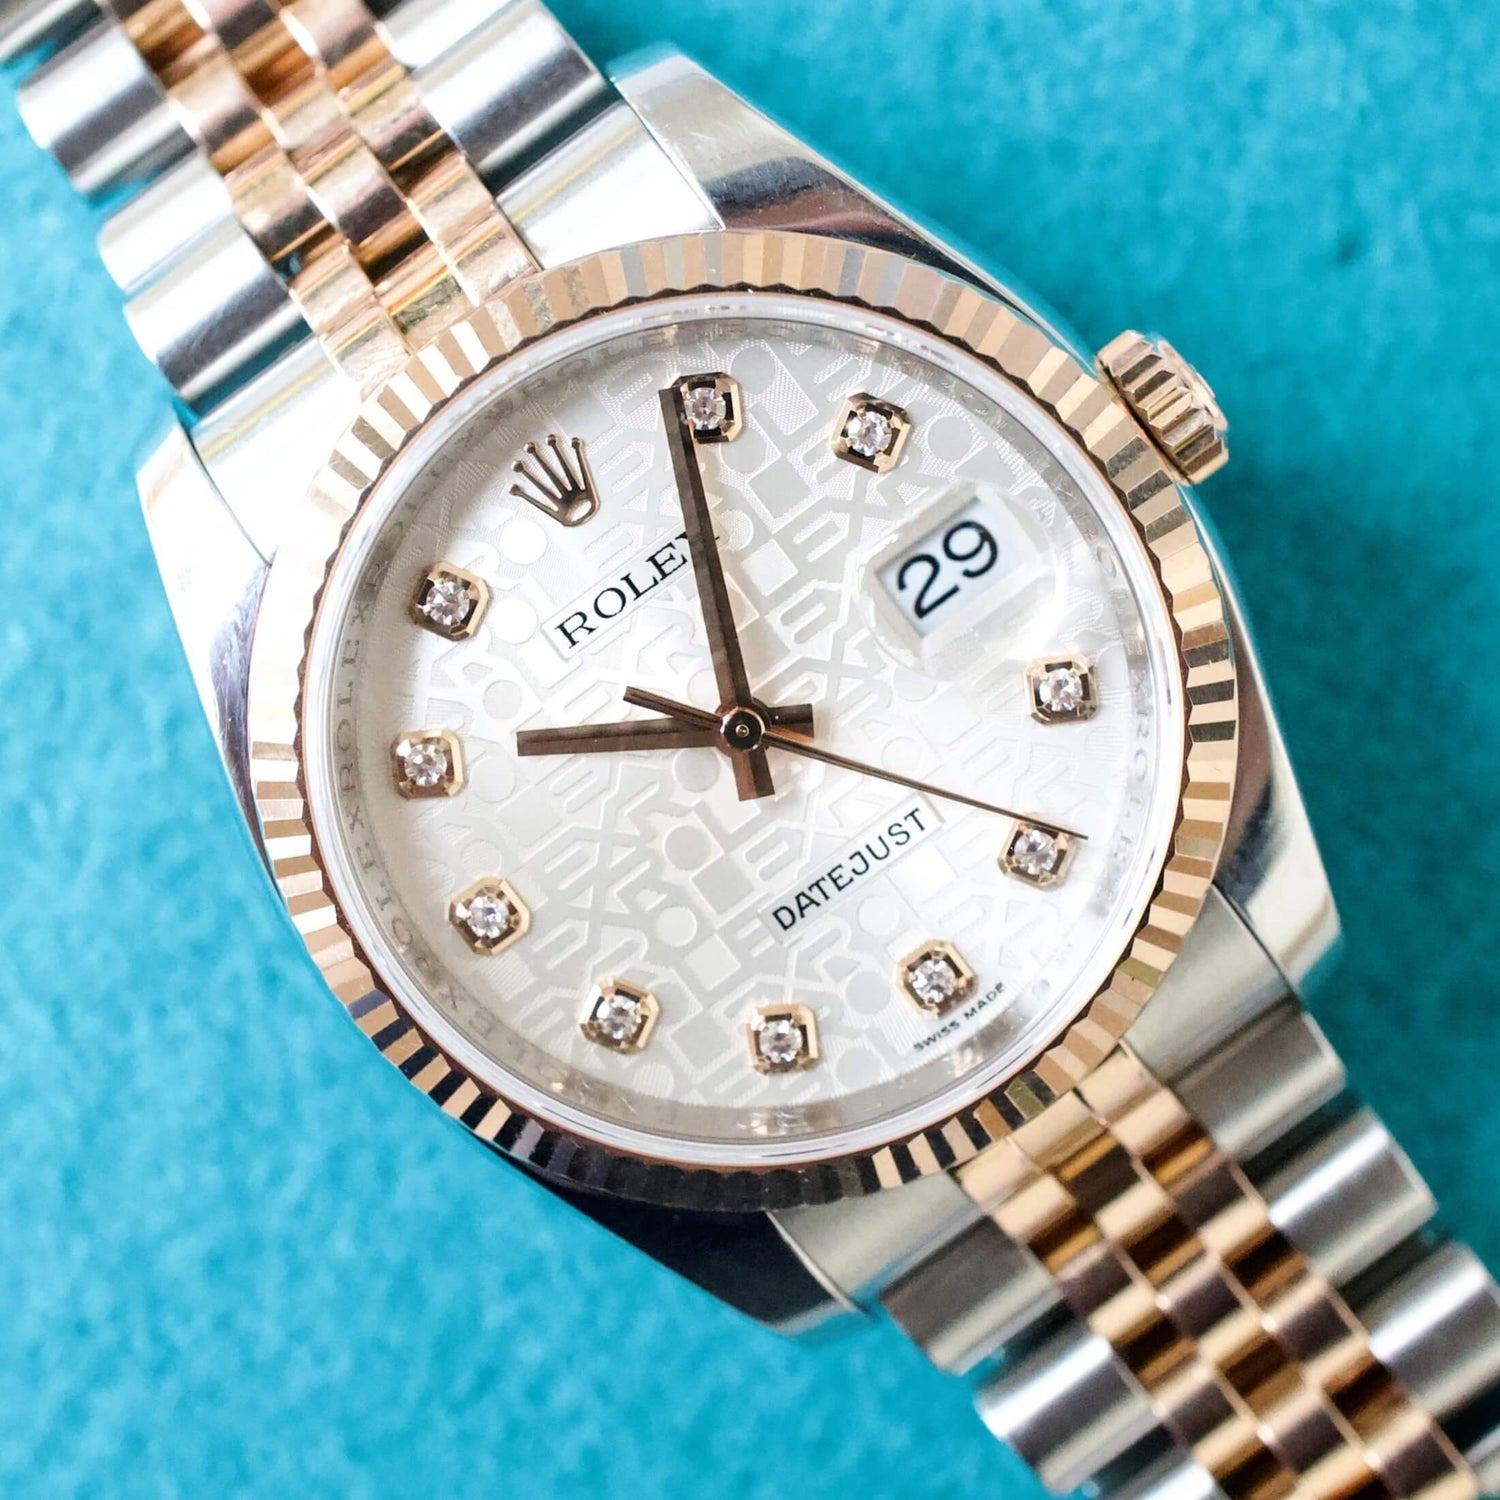 Rolex Datejust 36MM 116231 FACTORY ANNIVERSARY DIAMOND DIAL, 18K Rose Gold and Steel Two Tone  McLean Virginia